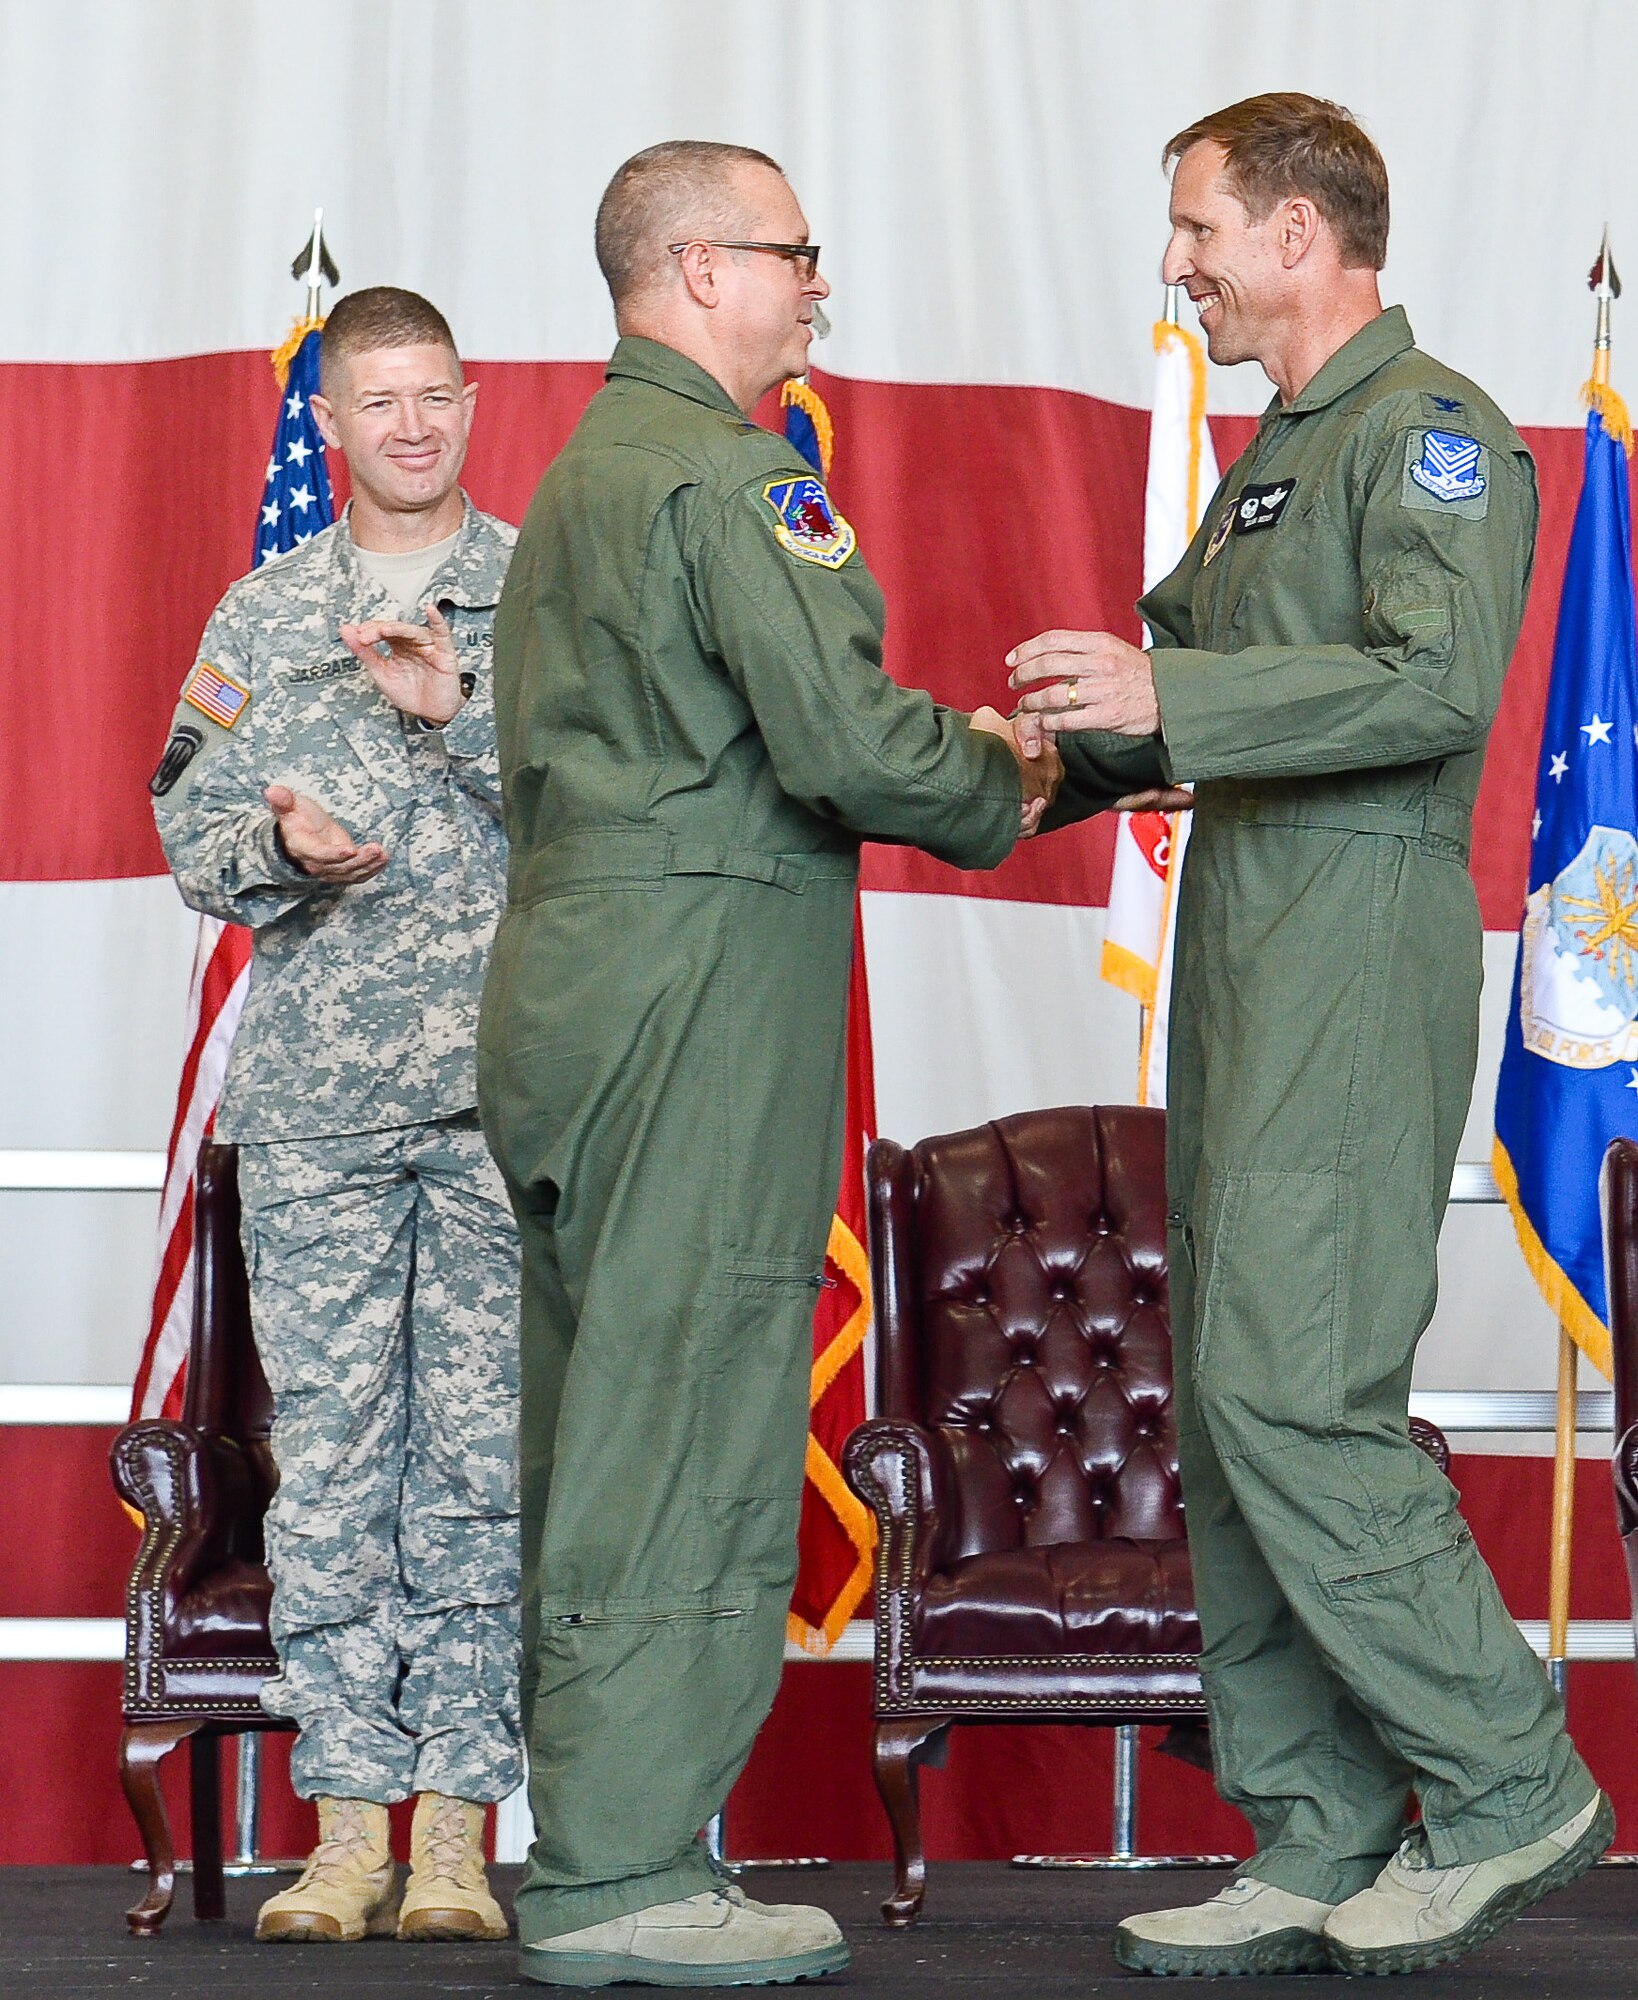 U.S. Air Force Brig. Gen. Jesse Simmons Jr., commander of the Georgia Air National Guard, congratulates Col. Mark Weber on assuming command of the 116th Air Control Wing as U.S. Army Brig. Gen. Joe Jarrard, adjutant general, Georgia Department of Defense, looks on during a Change of Command ceremony at Robins Air Force Base, Ga., July 11, 2015.  Weber assumed command of the 116th ACW from Col. Kevin Clotfelter during a change of command ceremony officiated by Simmons. The 116th ACW provides manned, joint airborne command and control, battle management, intelligence, surveillance, and reconnaissance support to combatant commanders around the globe flying the E-8C Joint STARS aircraft. (U.S. Air National Guard photo by Tech. Sgt. Regina Young/Released)